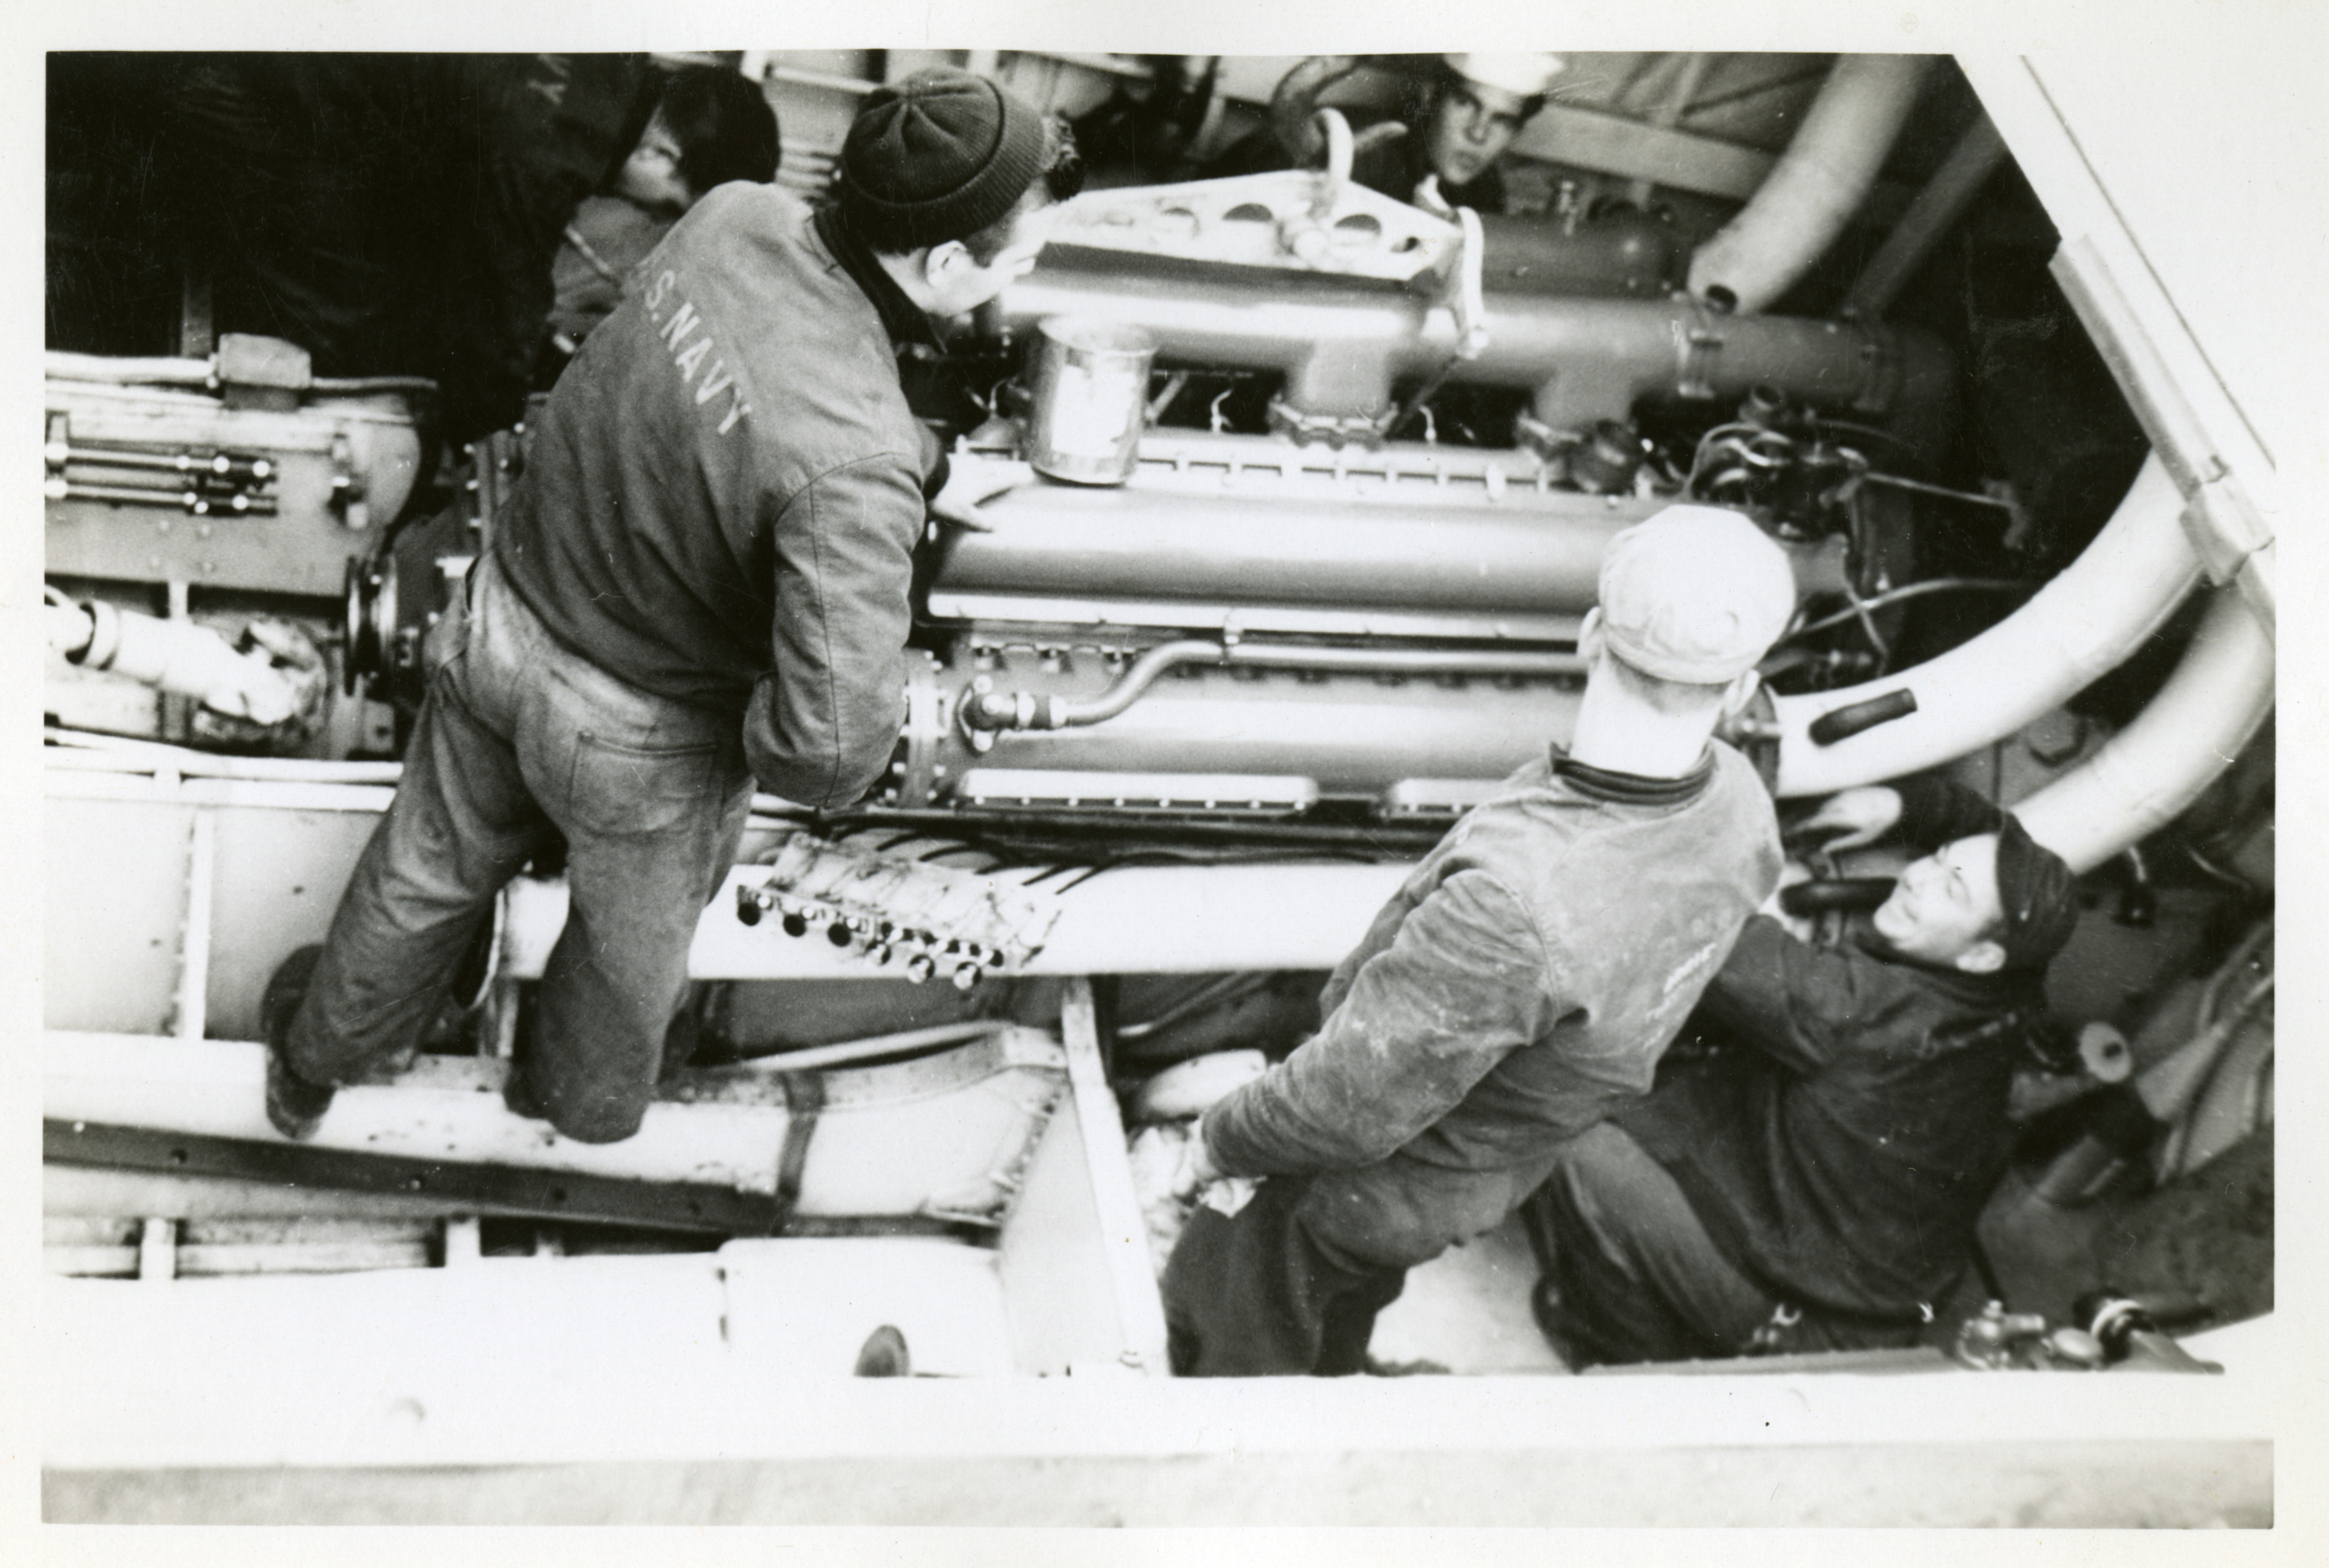 U.S. sailors working on PT boat engine in England or France, circa 1944